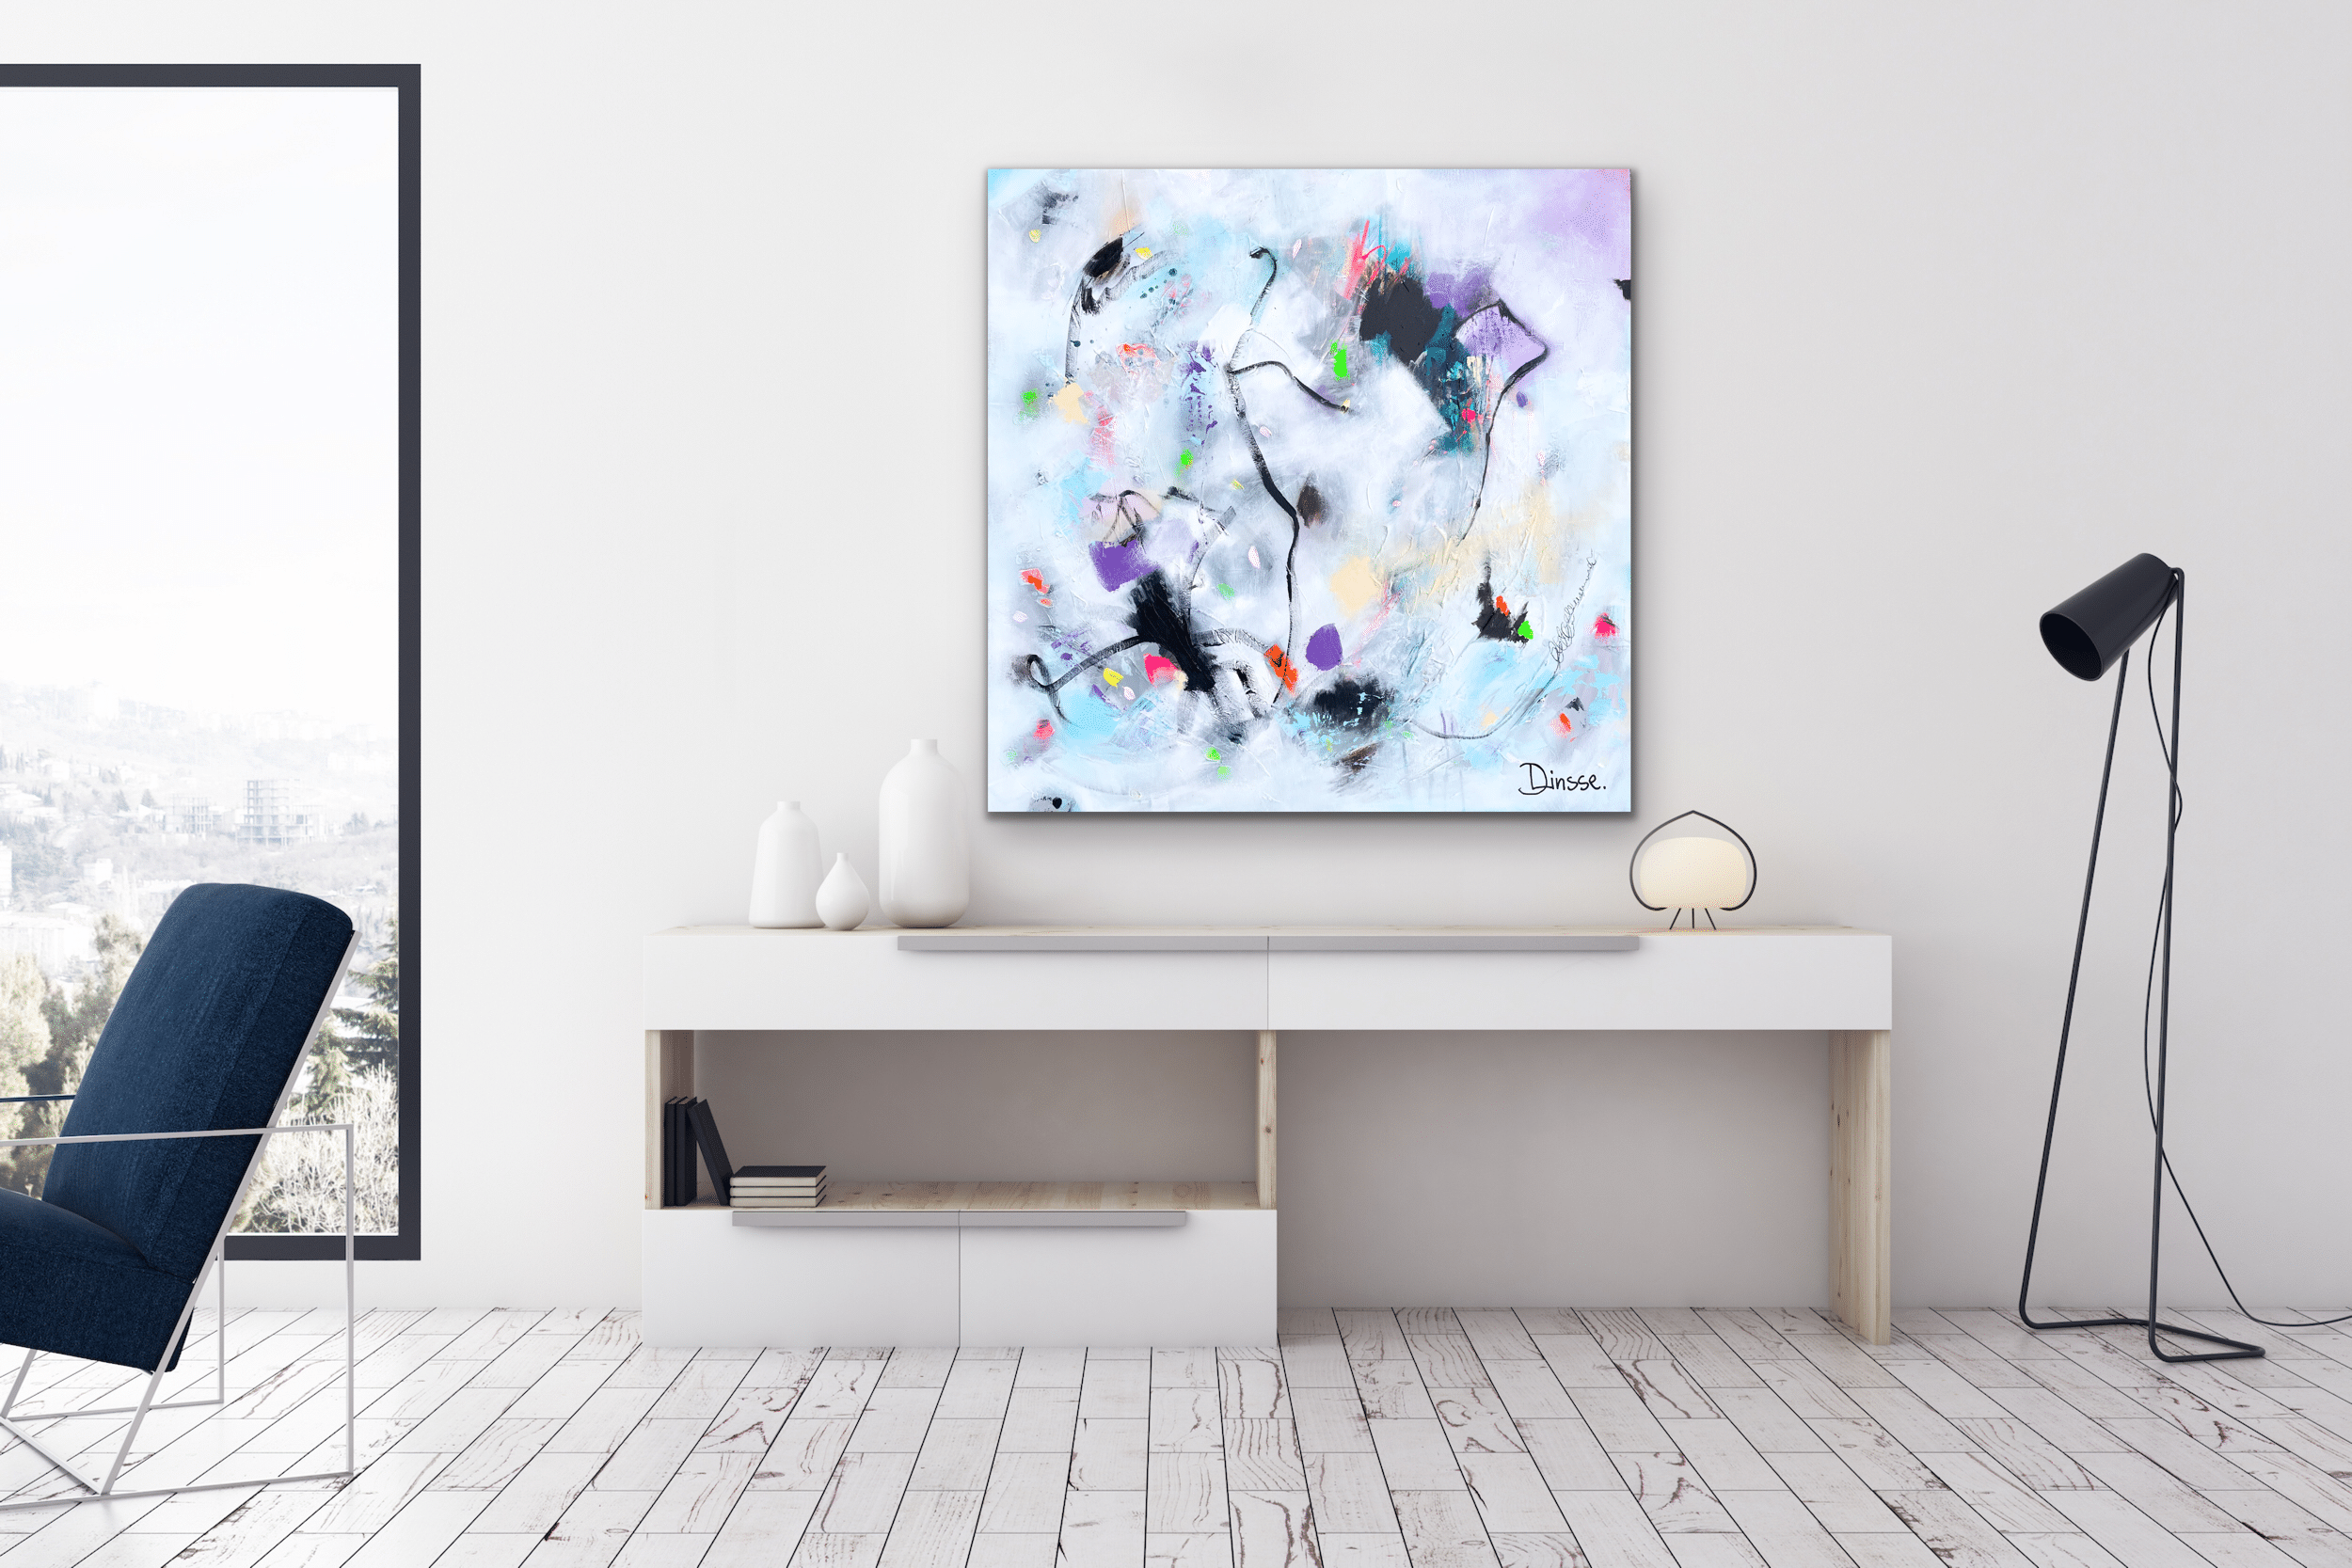 Acceptance - 100x100cm Mixed Media Painting by Fine Artist Diana Linsse